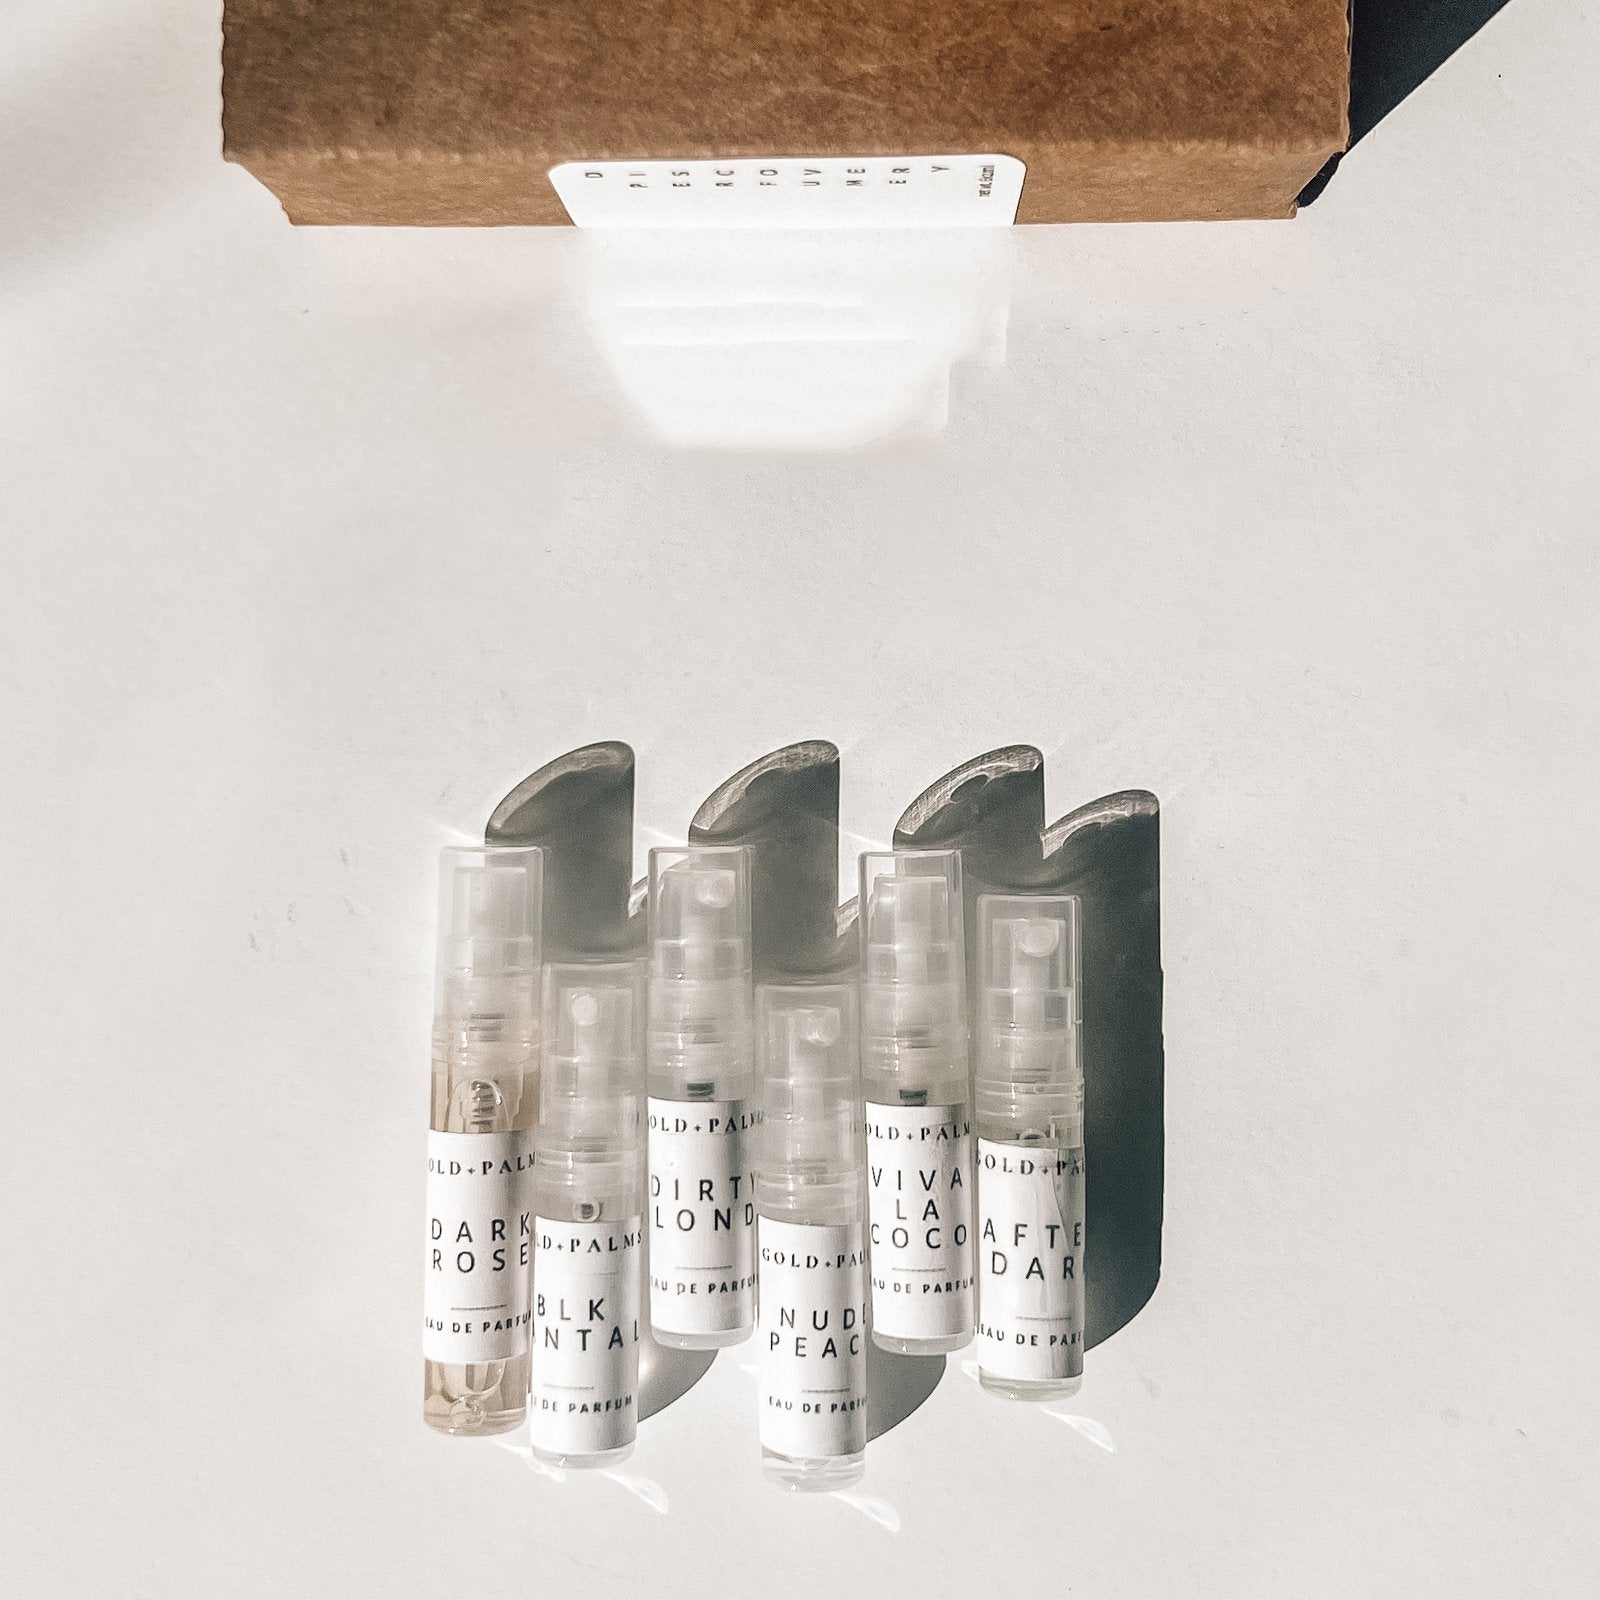 Gold and Palms Original Six 2 ml spray atomizer bottles with white background 